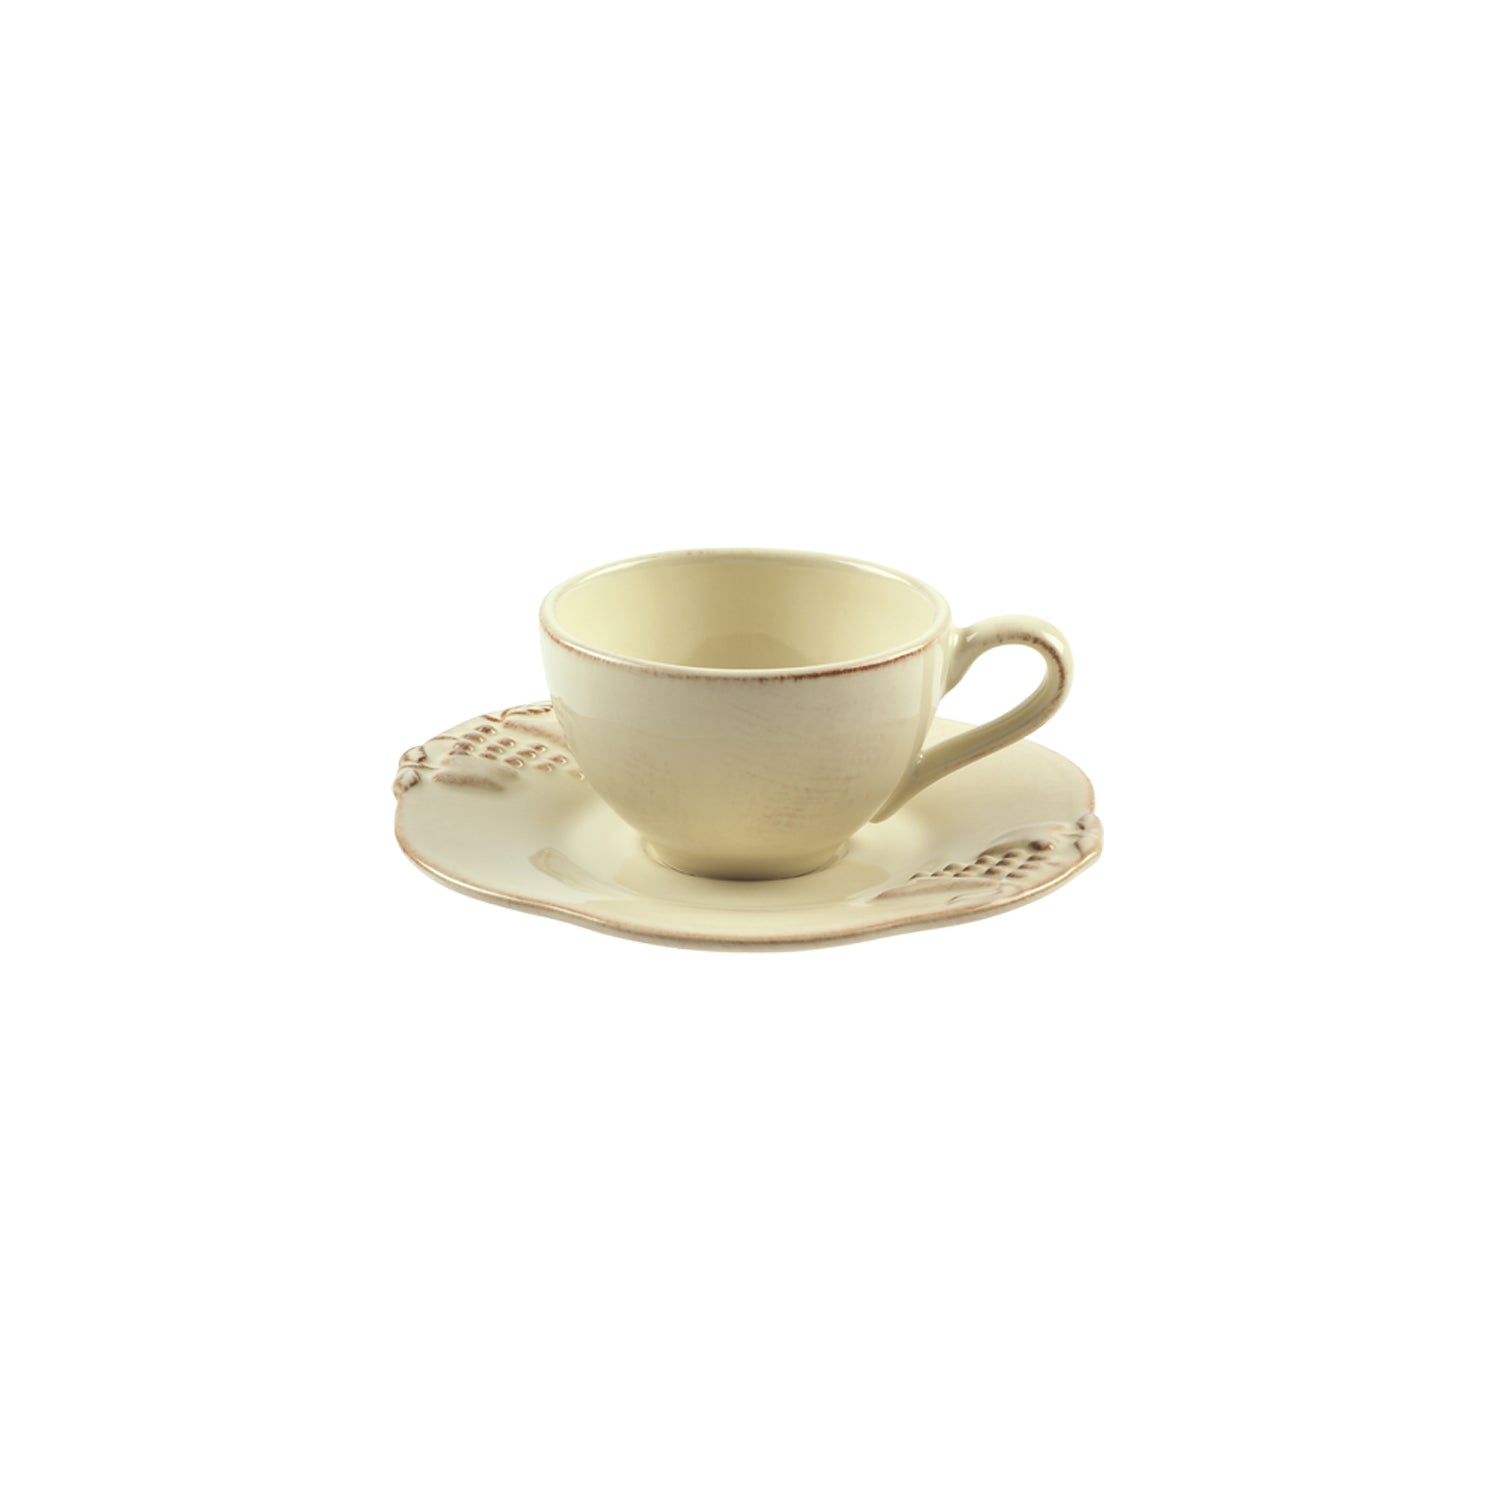 Madeira Harvest Coffee Cup and Saucer 3 oz. Vanilla Crème